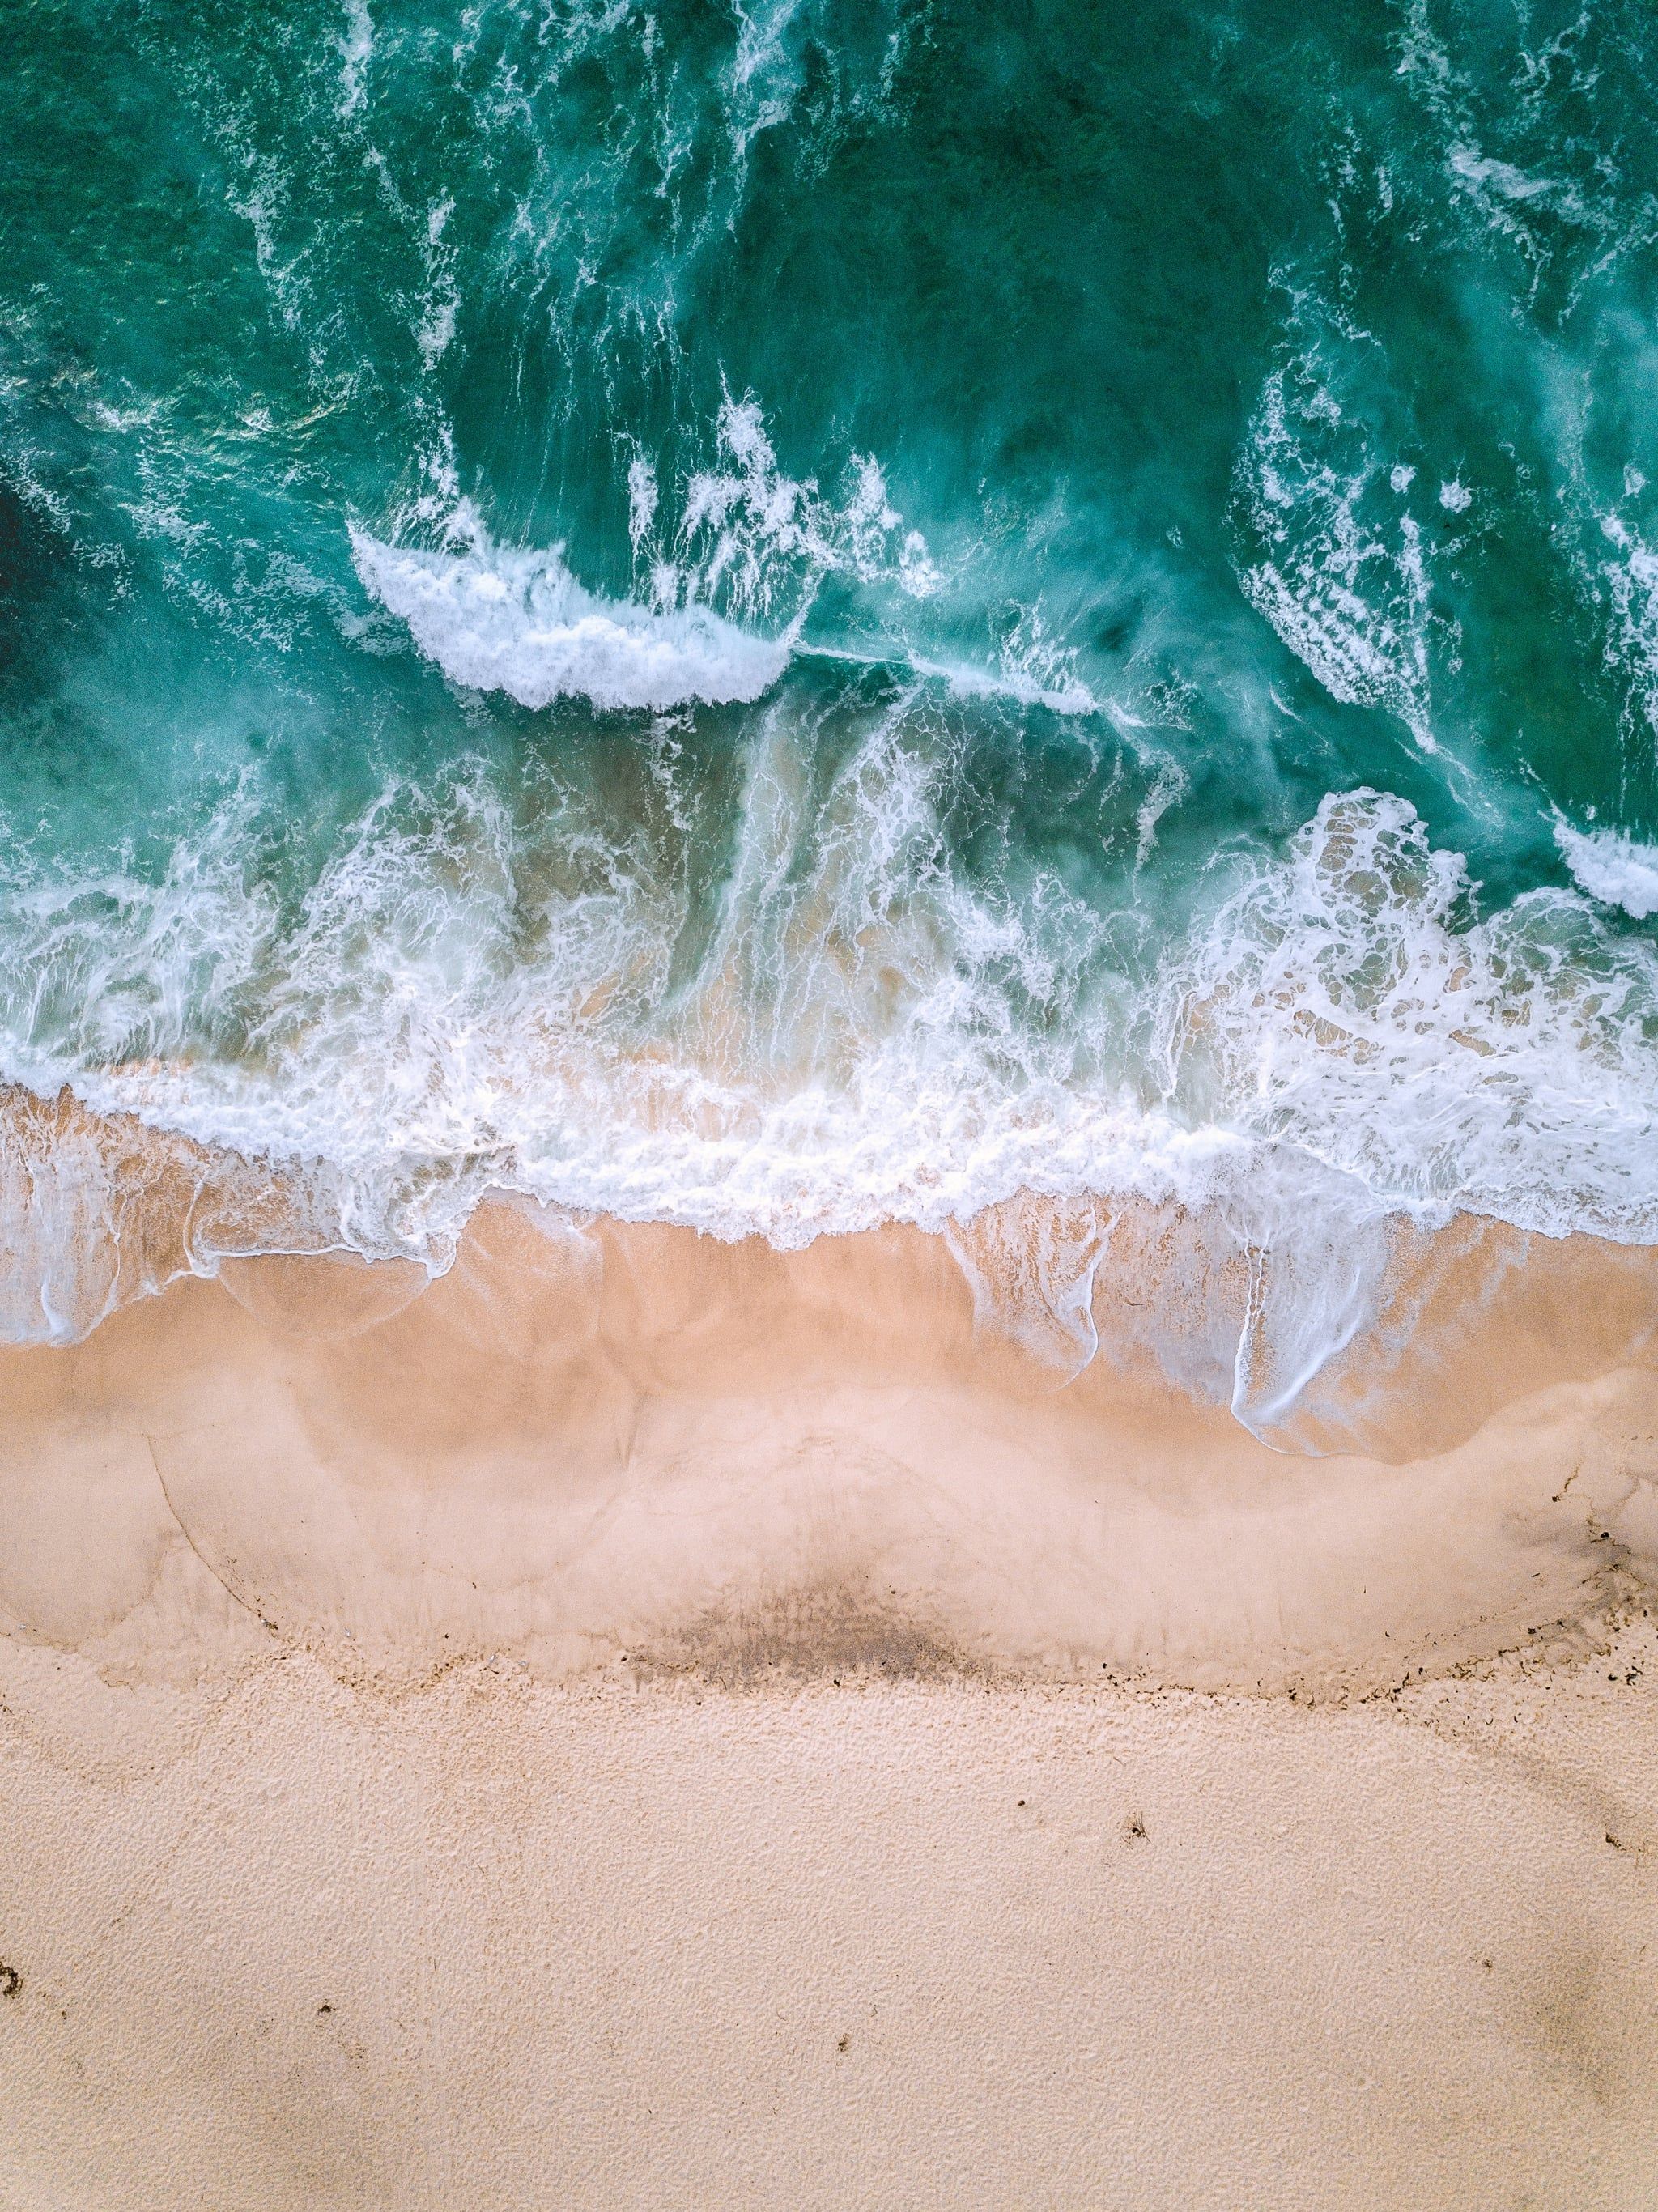 Ocean iPhone Wallpaper. The Best iOS 14 Wallpaper Ideas That'll Make Your Phone Look Aesthetically Pleasing AF